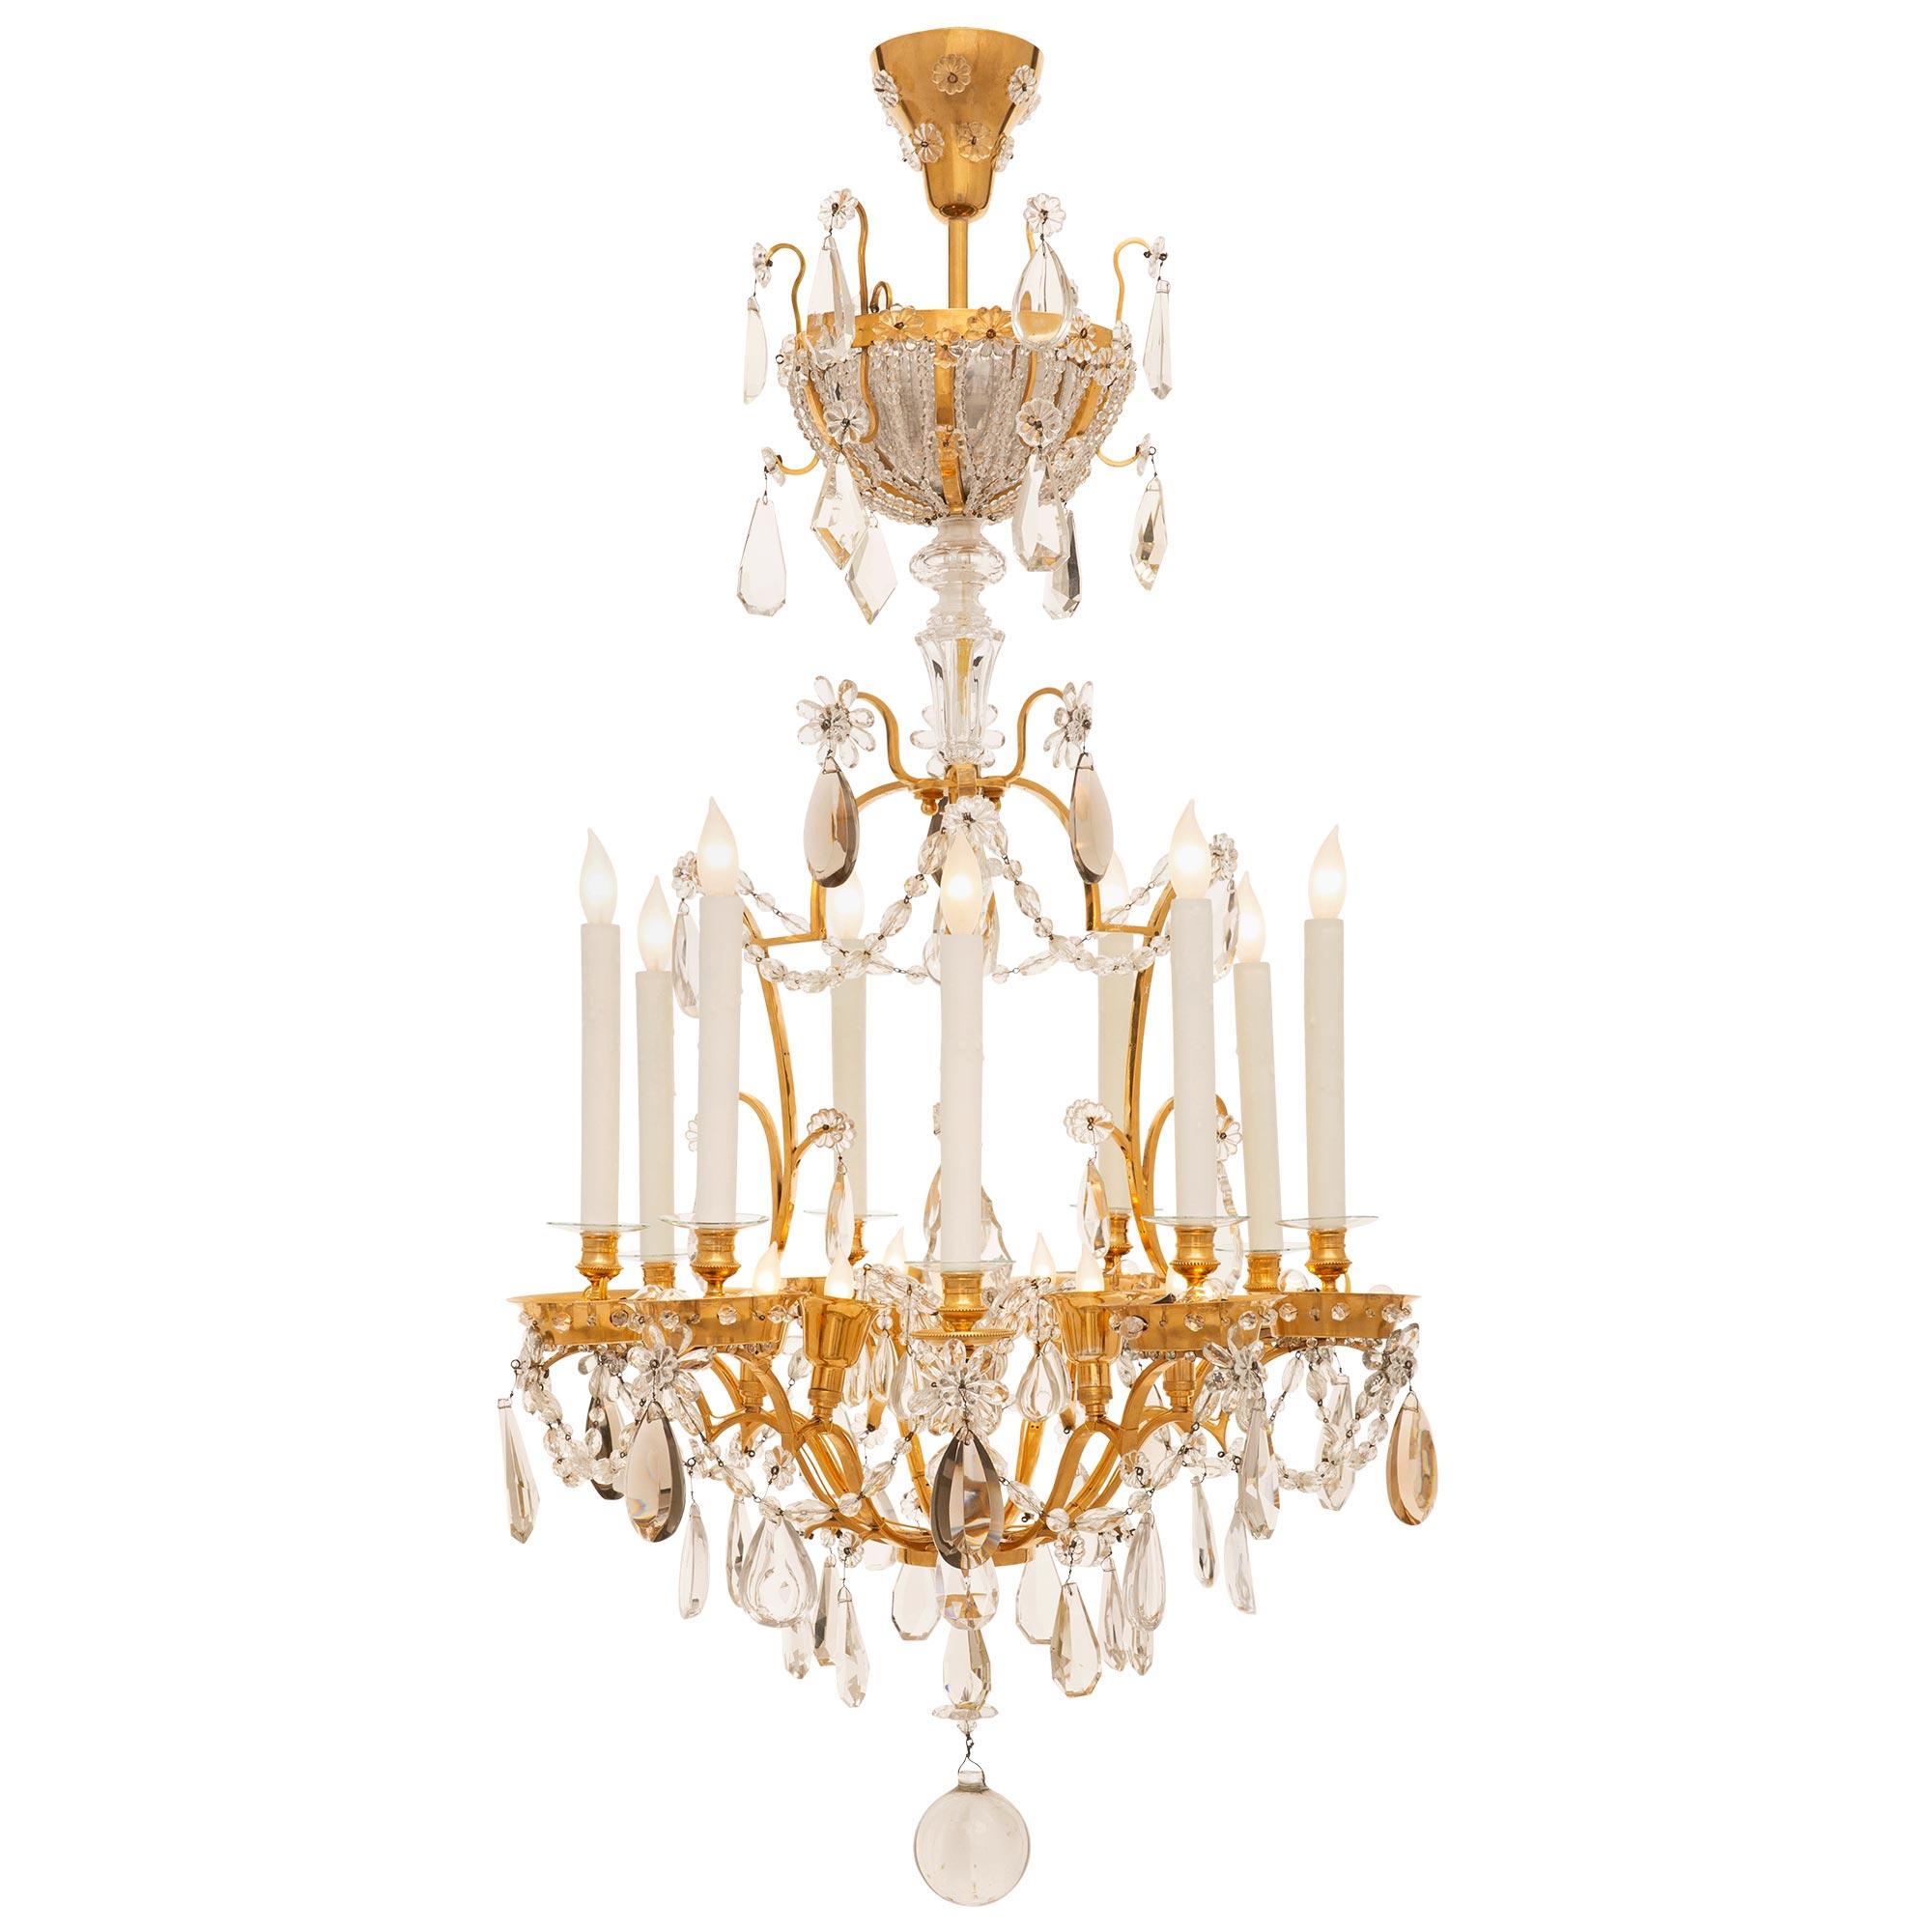 Silvered French 19th Century Louis XVI St. Bronze, Ormolu, and Crystal Chandelier For Sale